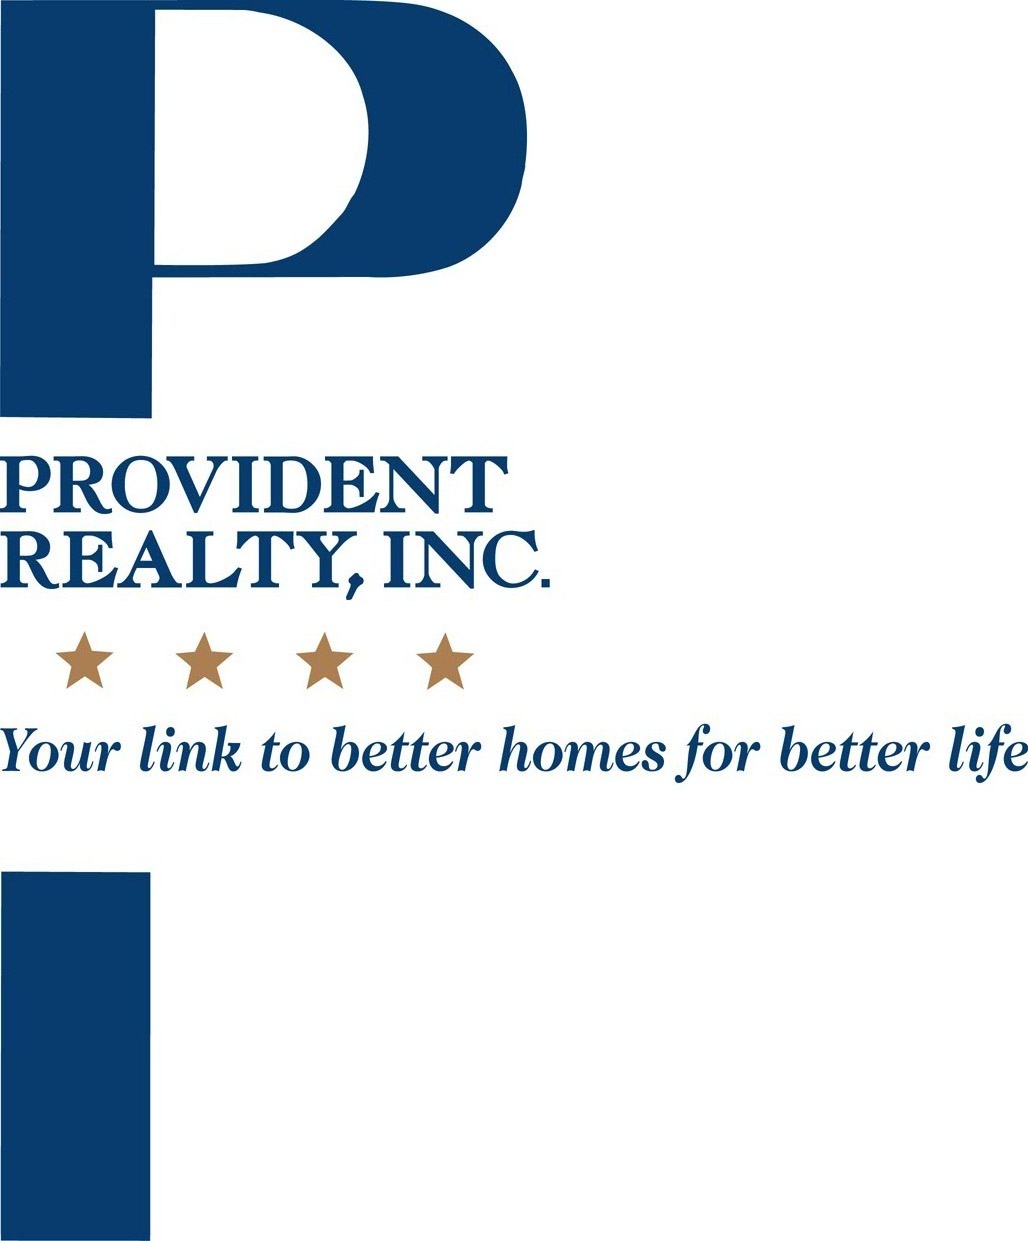 Provident Realty Inc.